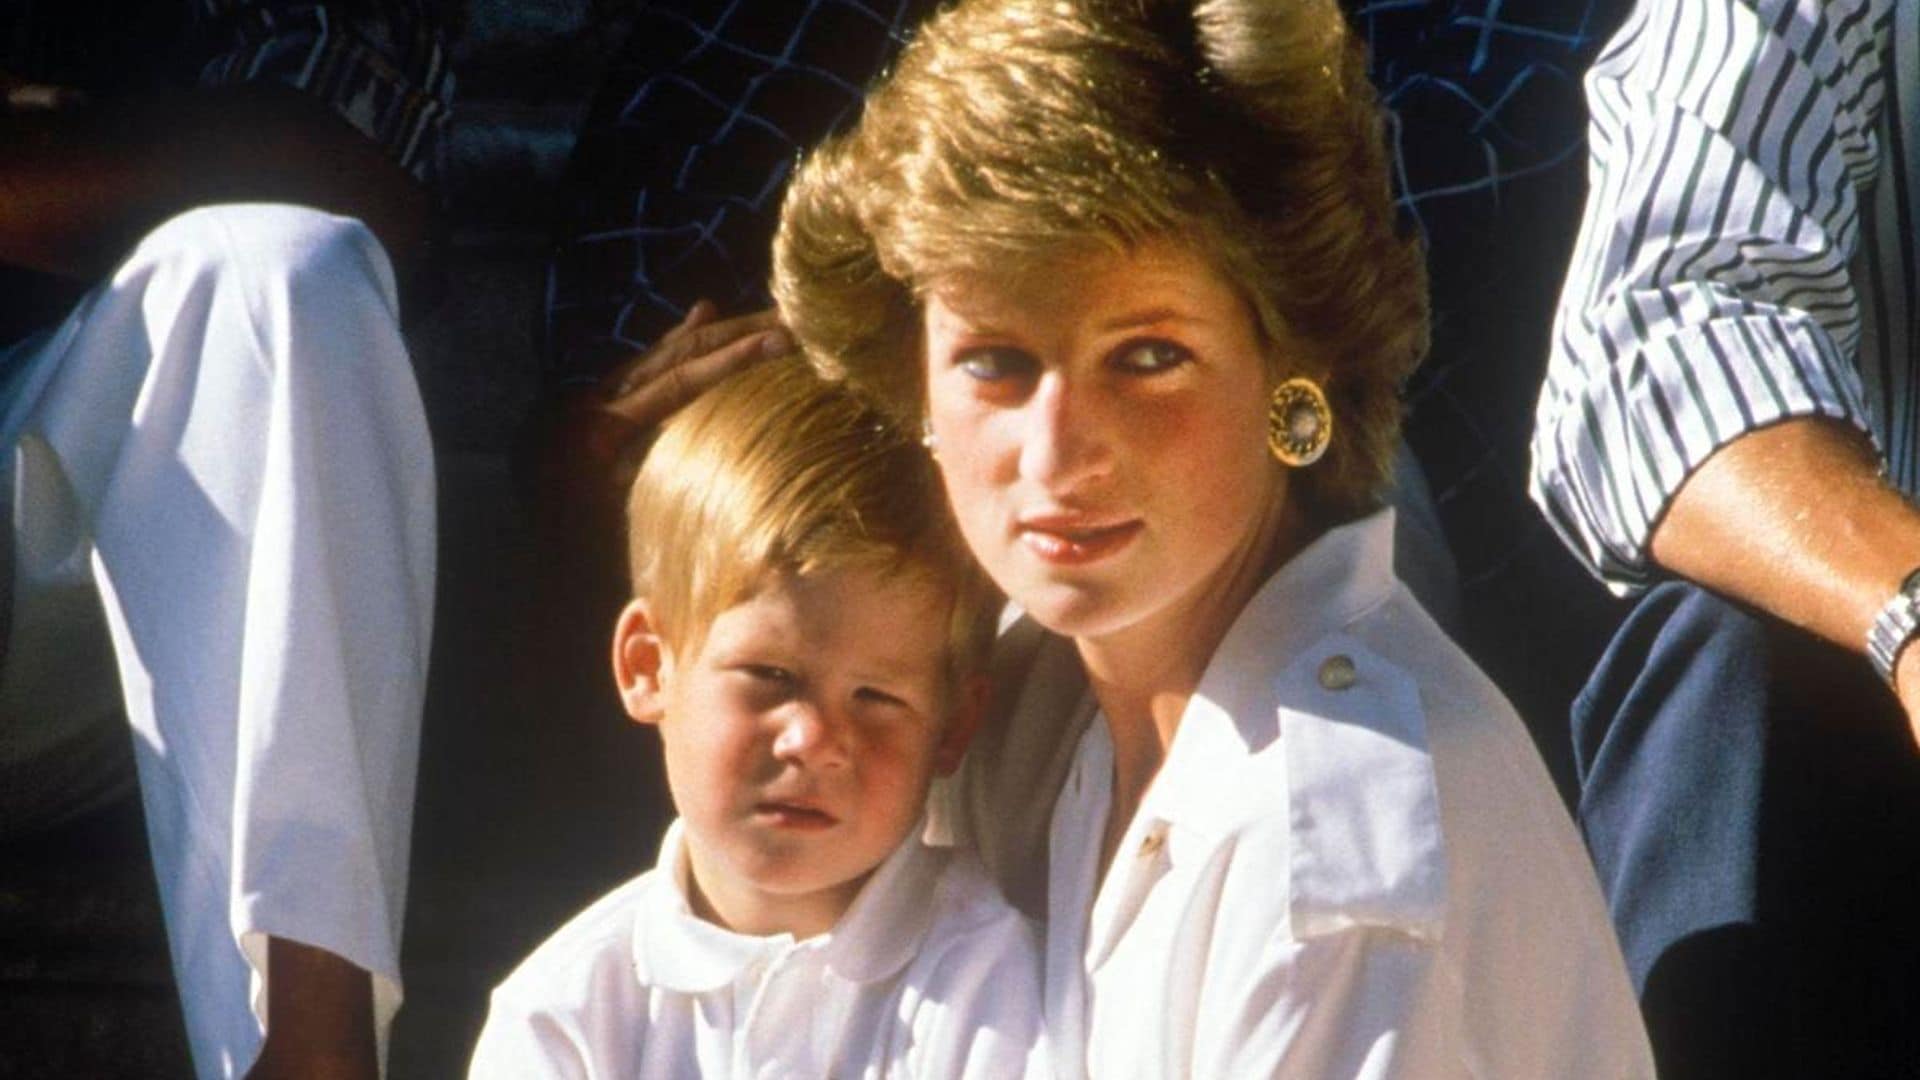 Prince Harry speaks about upcoming 25th anniversary of mom Princess Diana's death